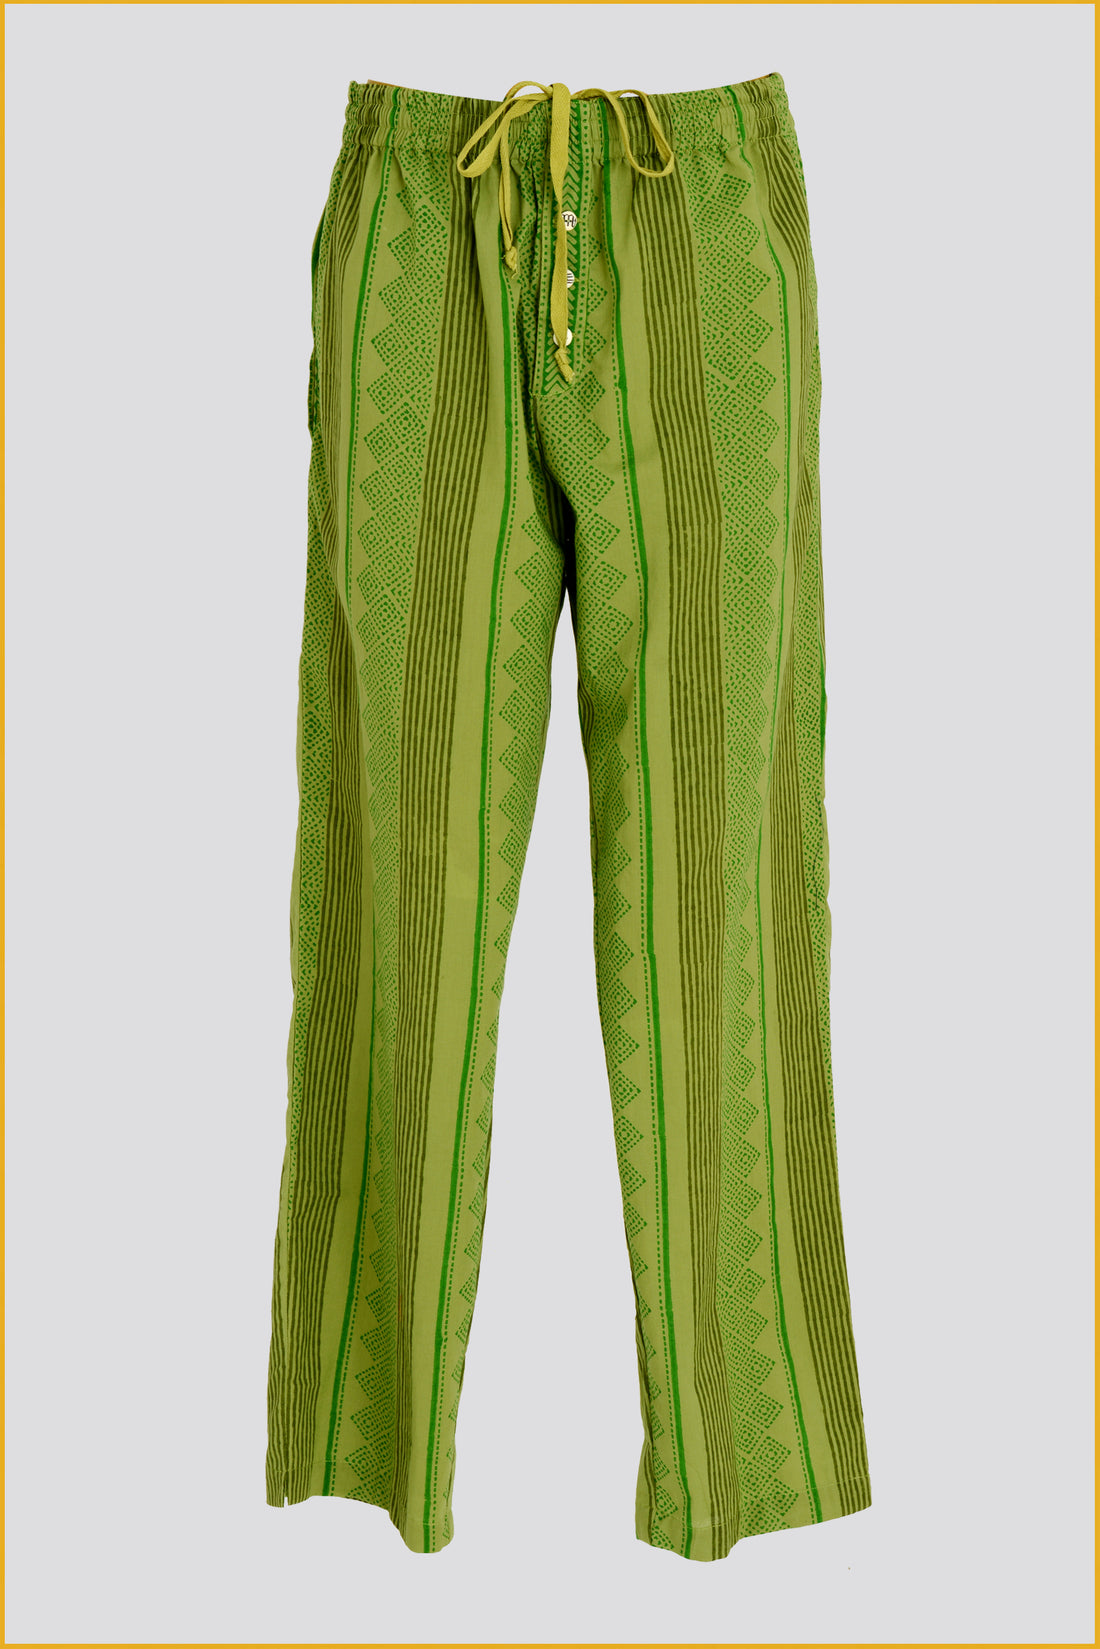 Colvert - Cotton Voile Block Print Long Pants with Hand Carved Bone Buttons (7424871923908)